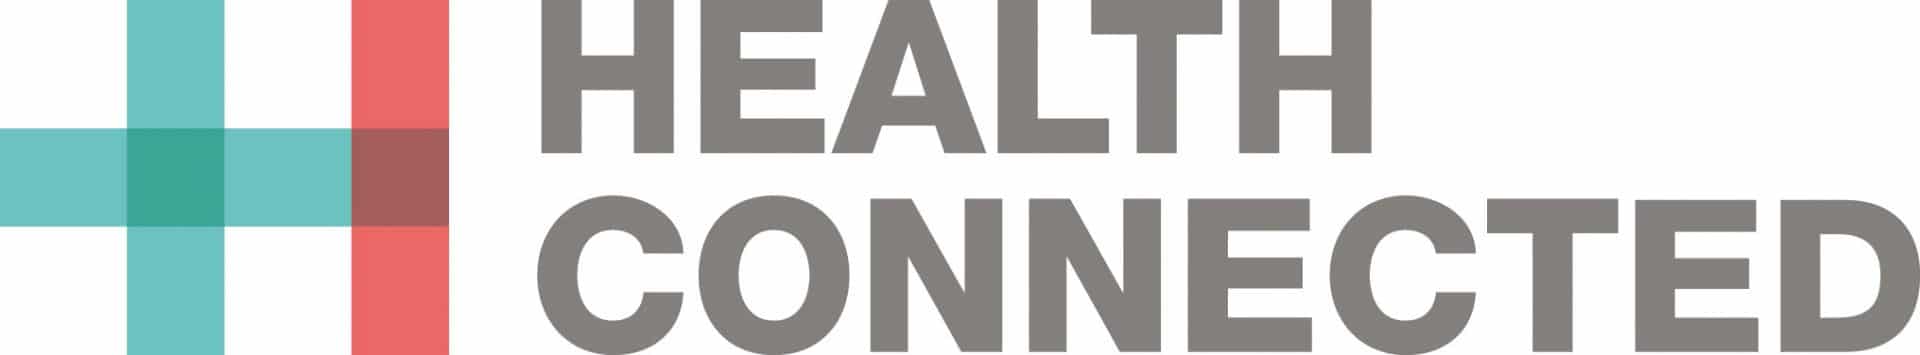 Healty Connected Logo